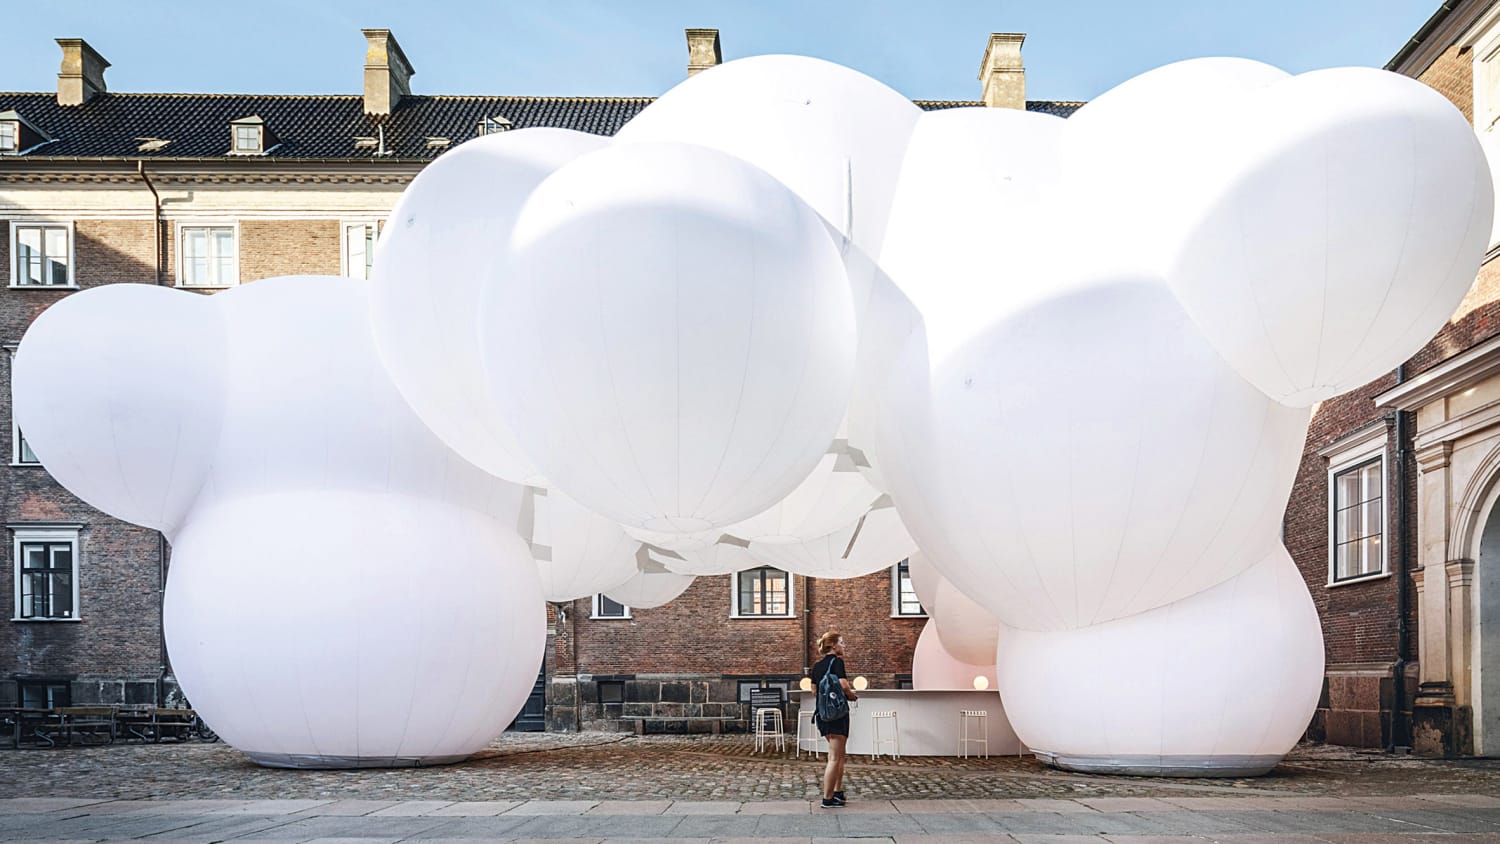 Five "bubbletecture" projects that show innovation in inflatables